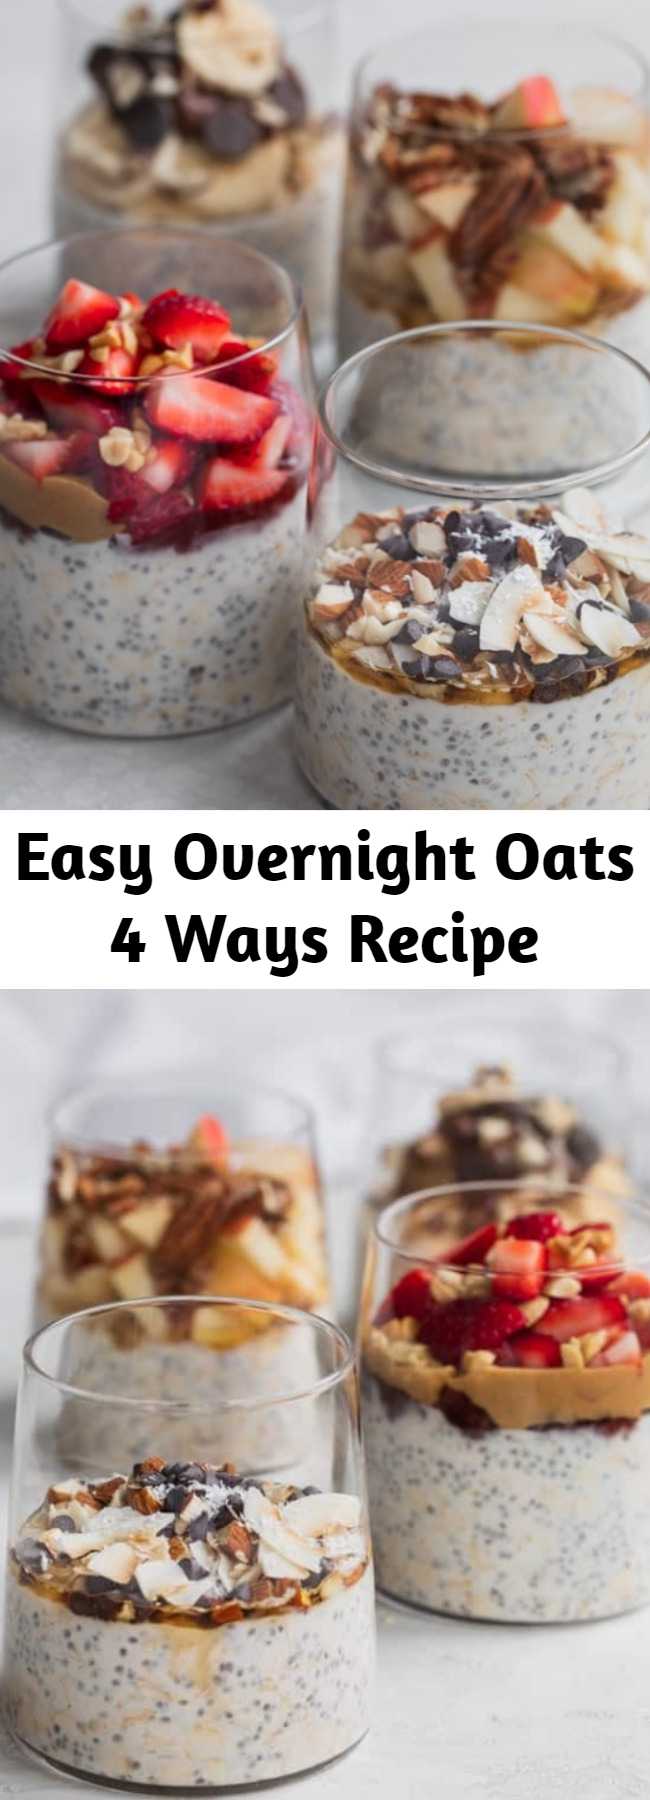 Easy Overnight Oats 4 Ways Recipe - This easy overnight oats recipe is a healthy simple breakfast that you can make ahead for busy mornings and customize with many add-ins and toppings! #overnightoats #breakfast #breakfast